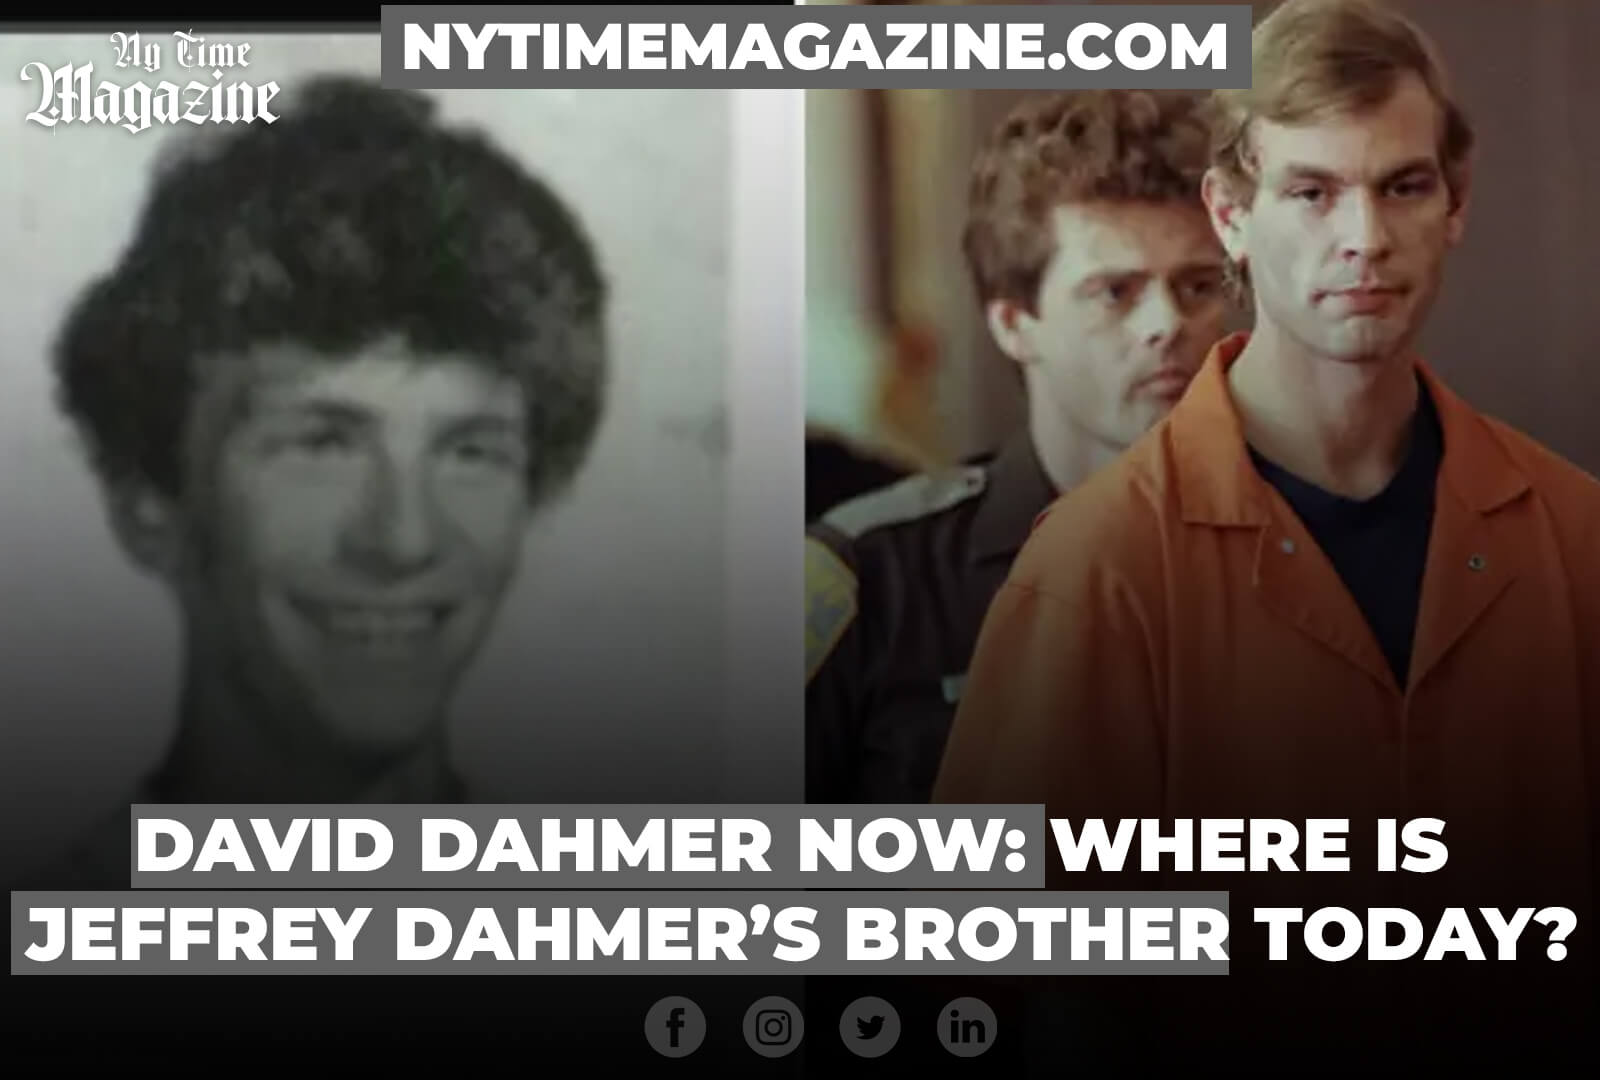 DAVID DAHMER NOW: WHERE IS JEFFREY DAHMER’S BROTHER TODAY?